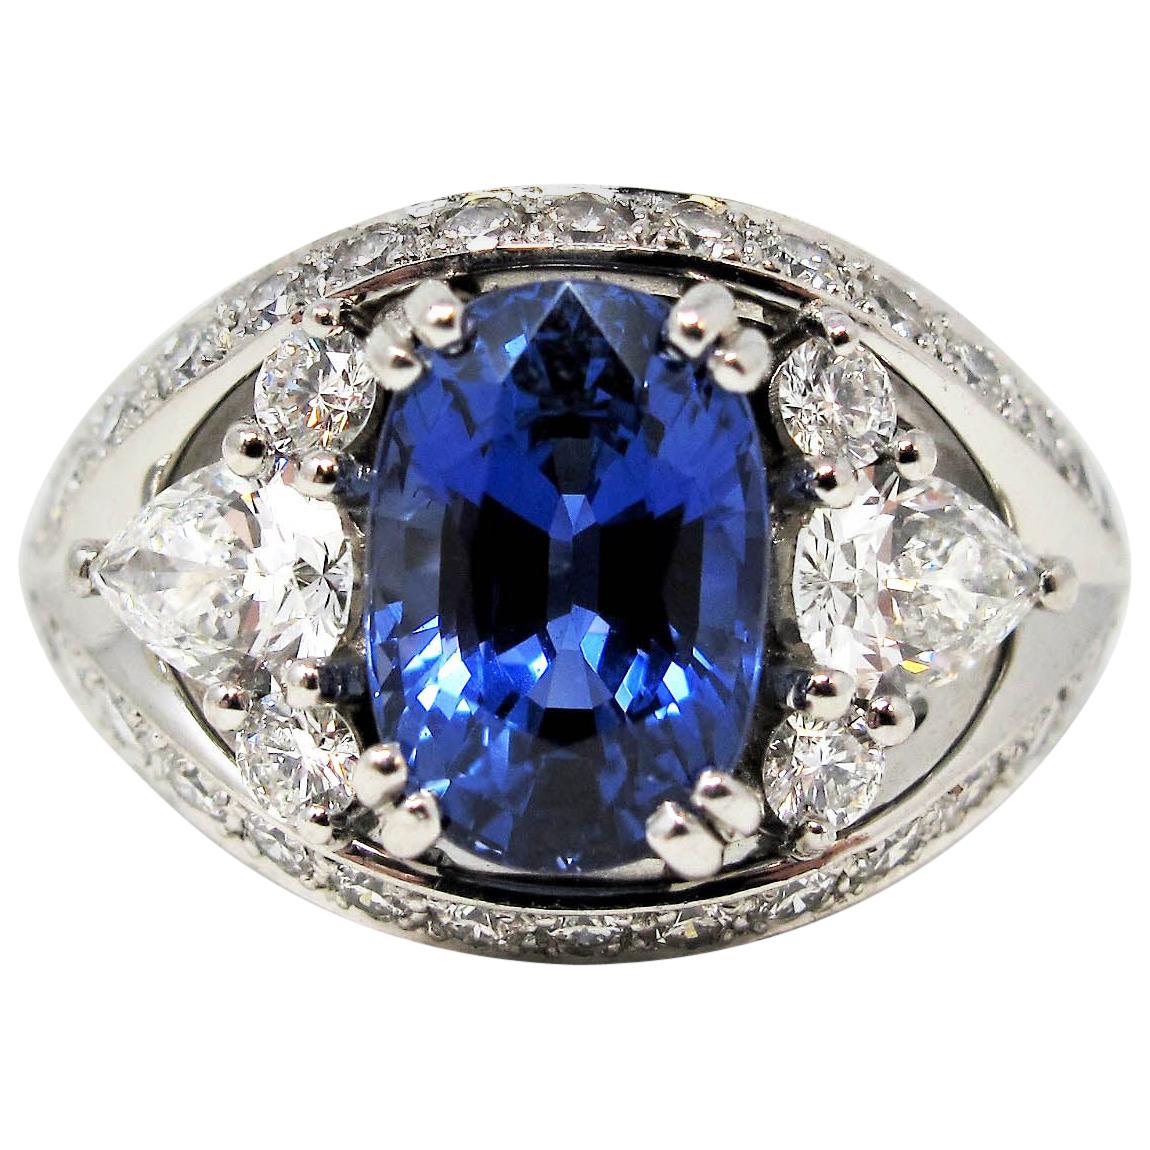 3.10 Carat Untreated Oval Mixed Cut Sapphire and Diamond Ring in Platinum